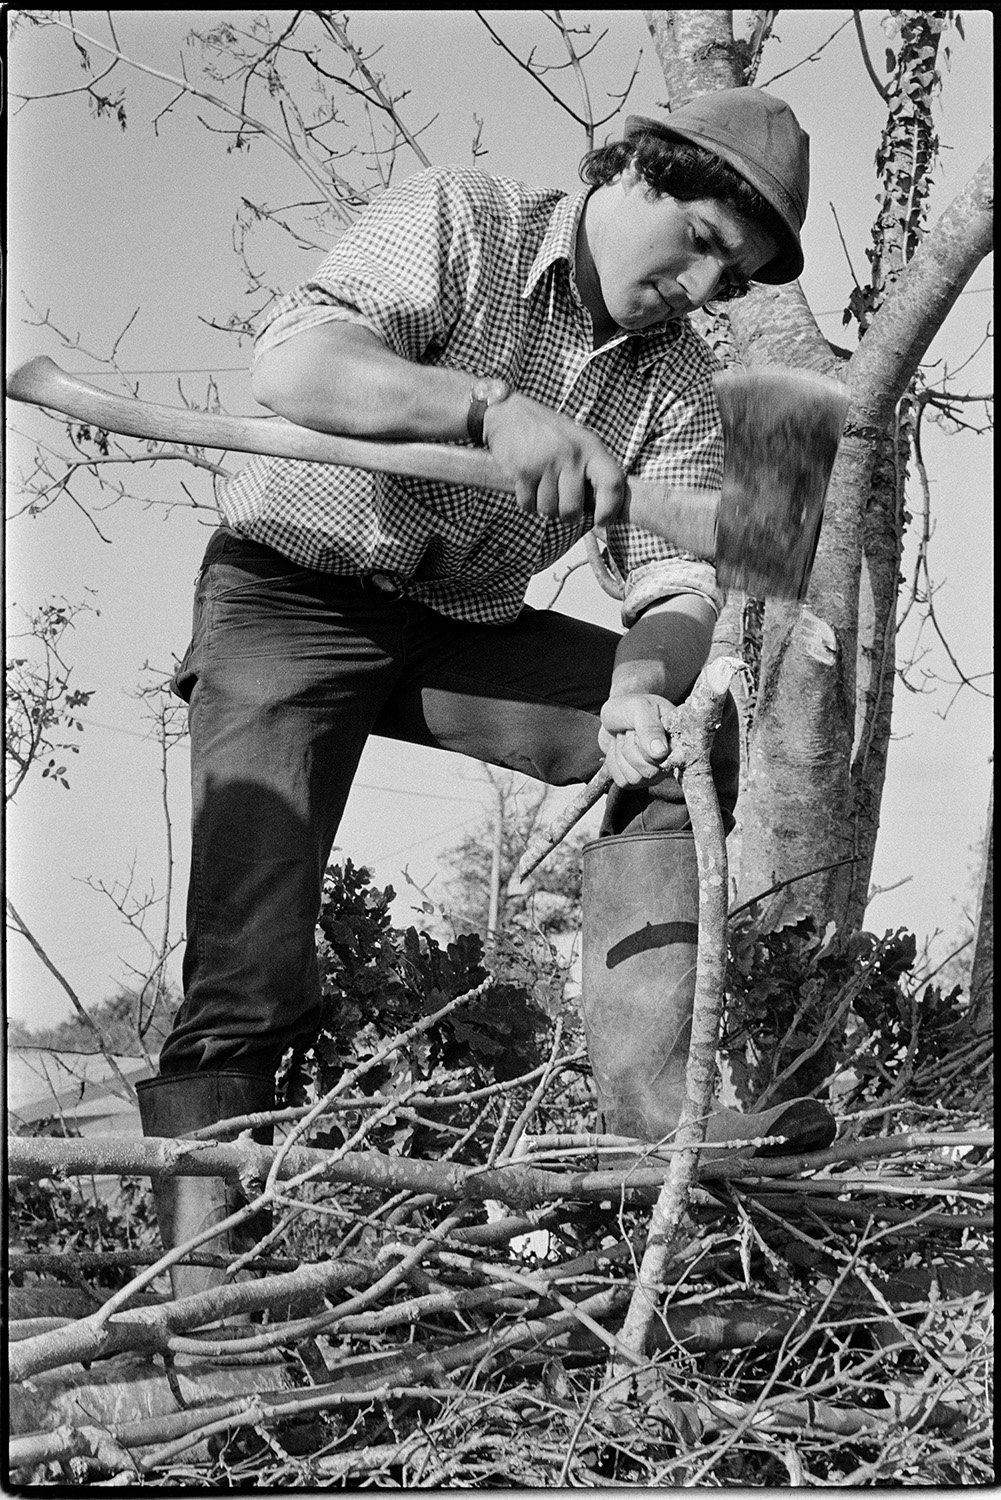 Farmers laying hedge, using chain saw. 
[Stephen Squire hedge laying at Lower Langham, Dolton. He is knocking a wooden cruck over the bent branches with an axe, to hold them in place.]